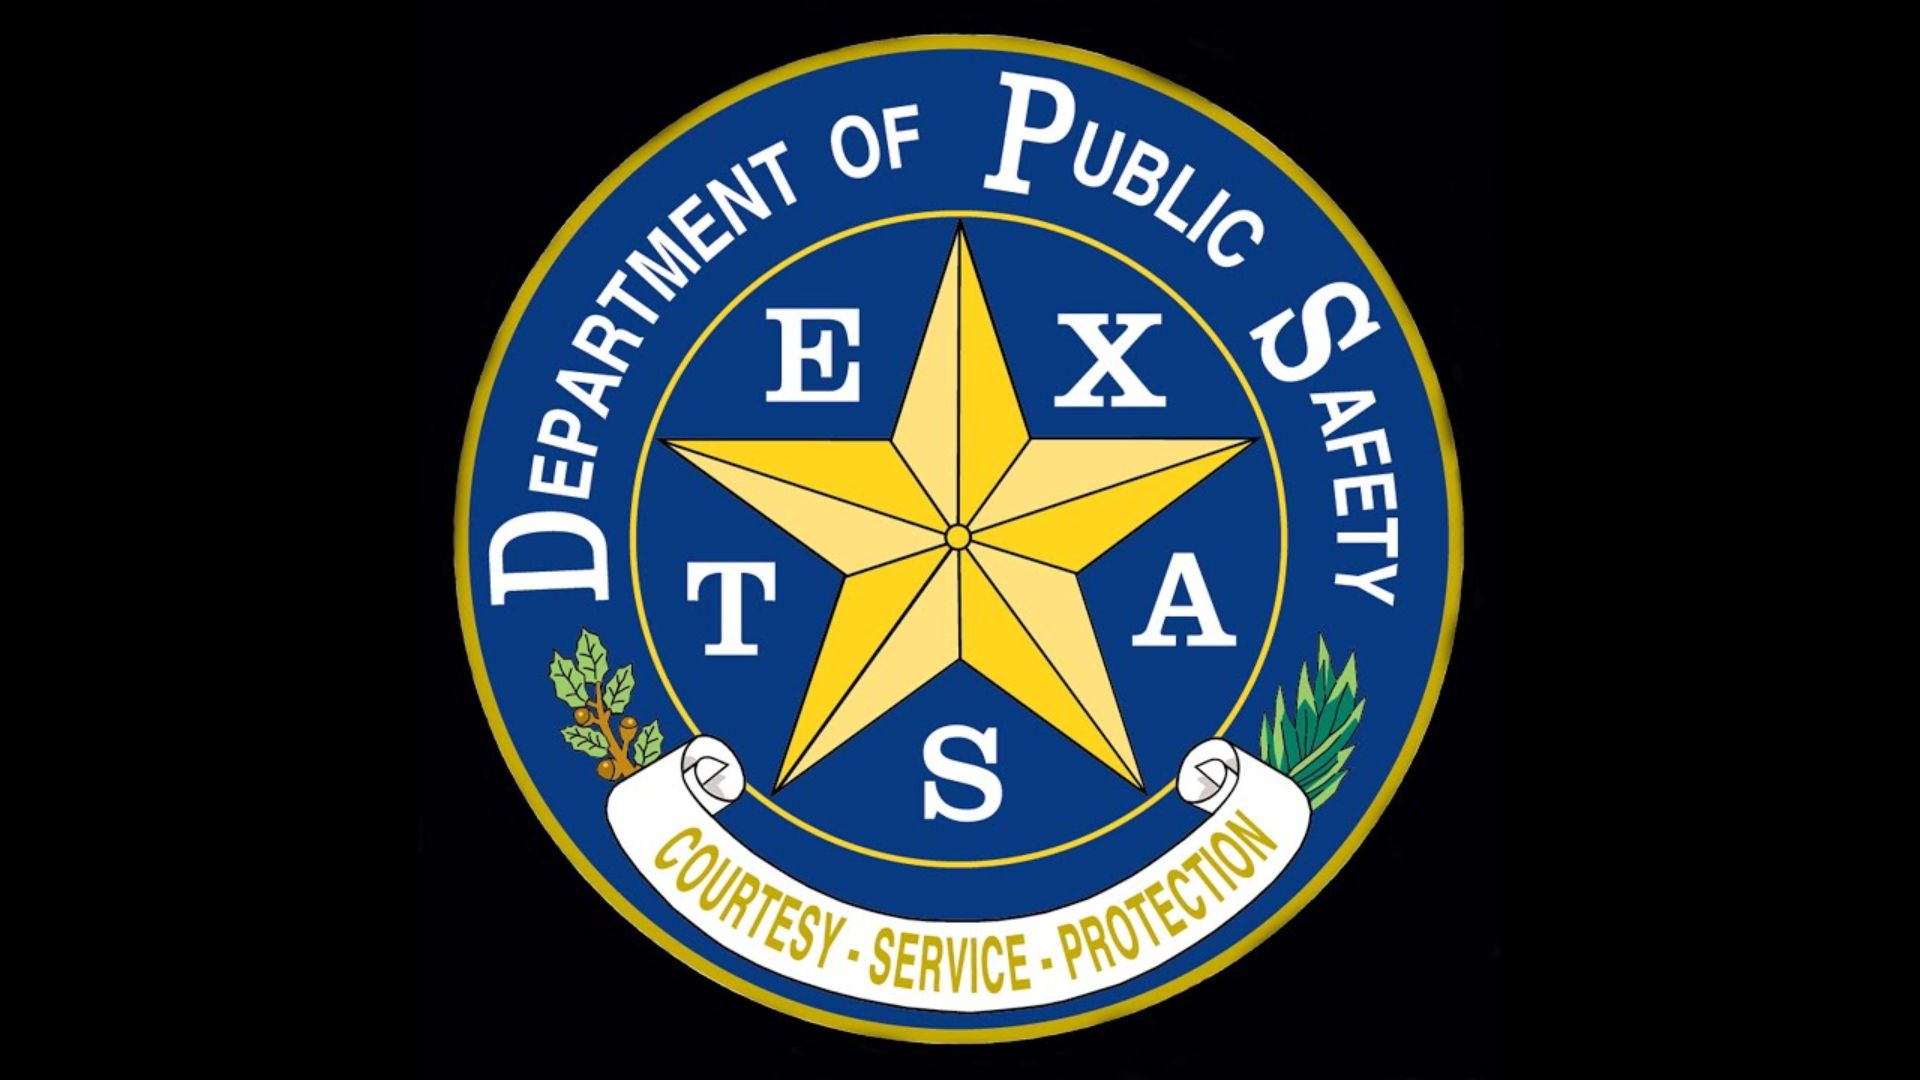 The Texas Department of Public Safety has made some big changes in its leadership team after Lieutenant Colonel Dwight Mathis decided to retire